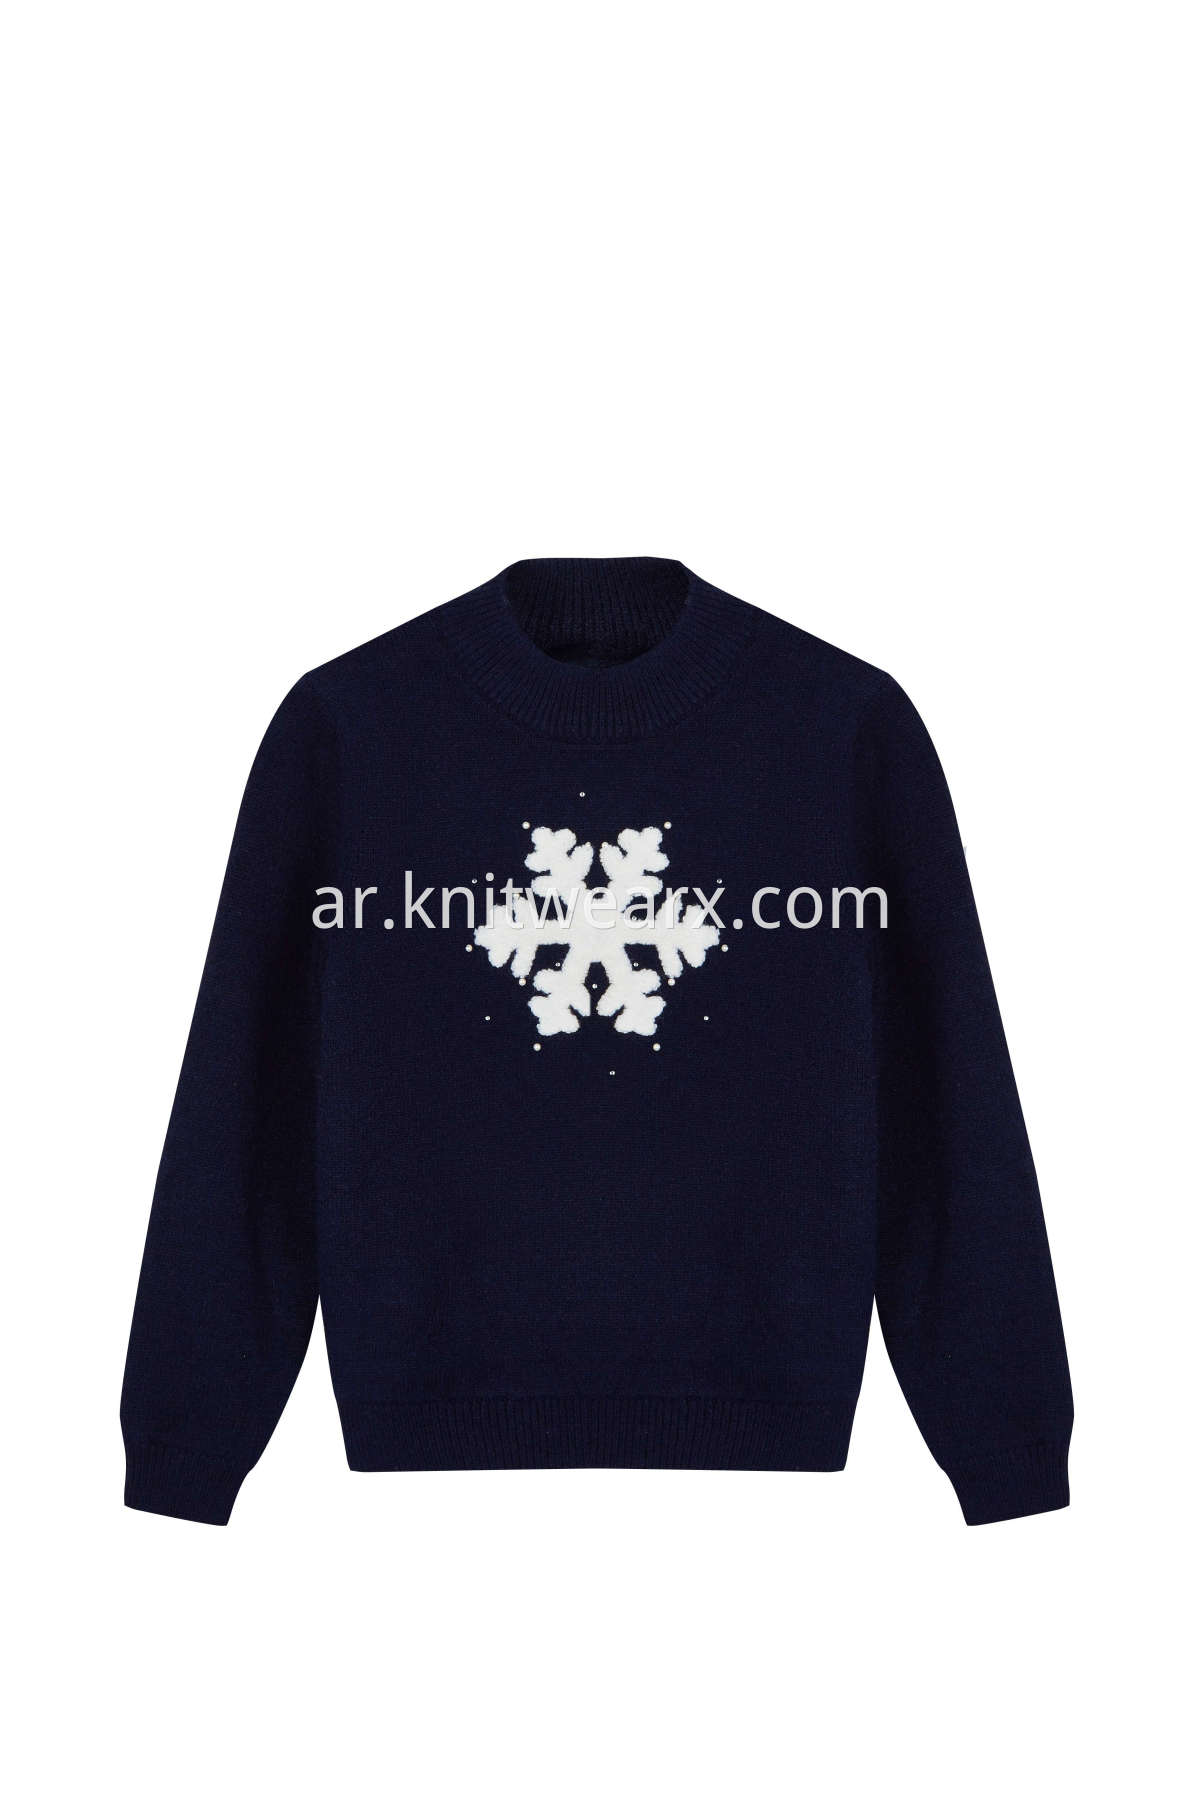 Girl's Nice Snowflake Sweater Long Sleeve Pullover Top